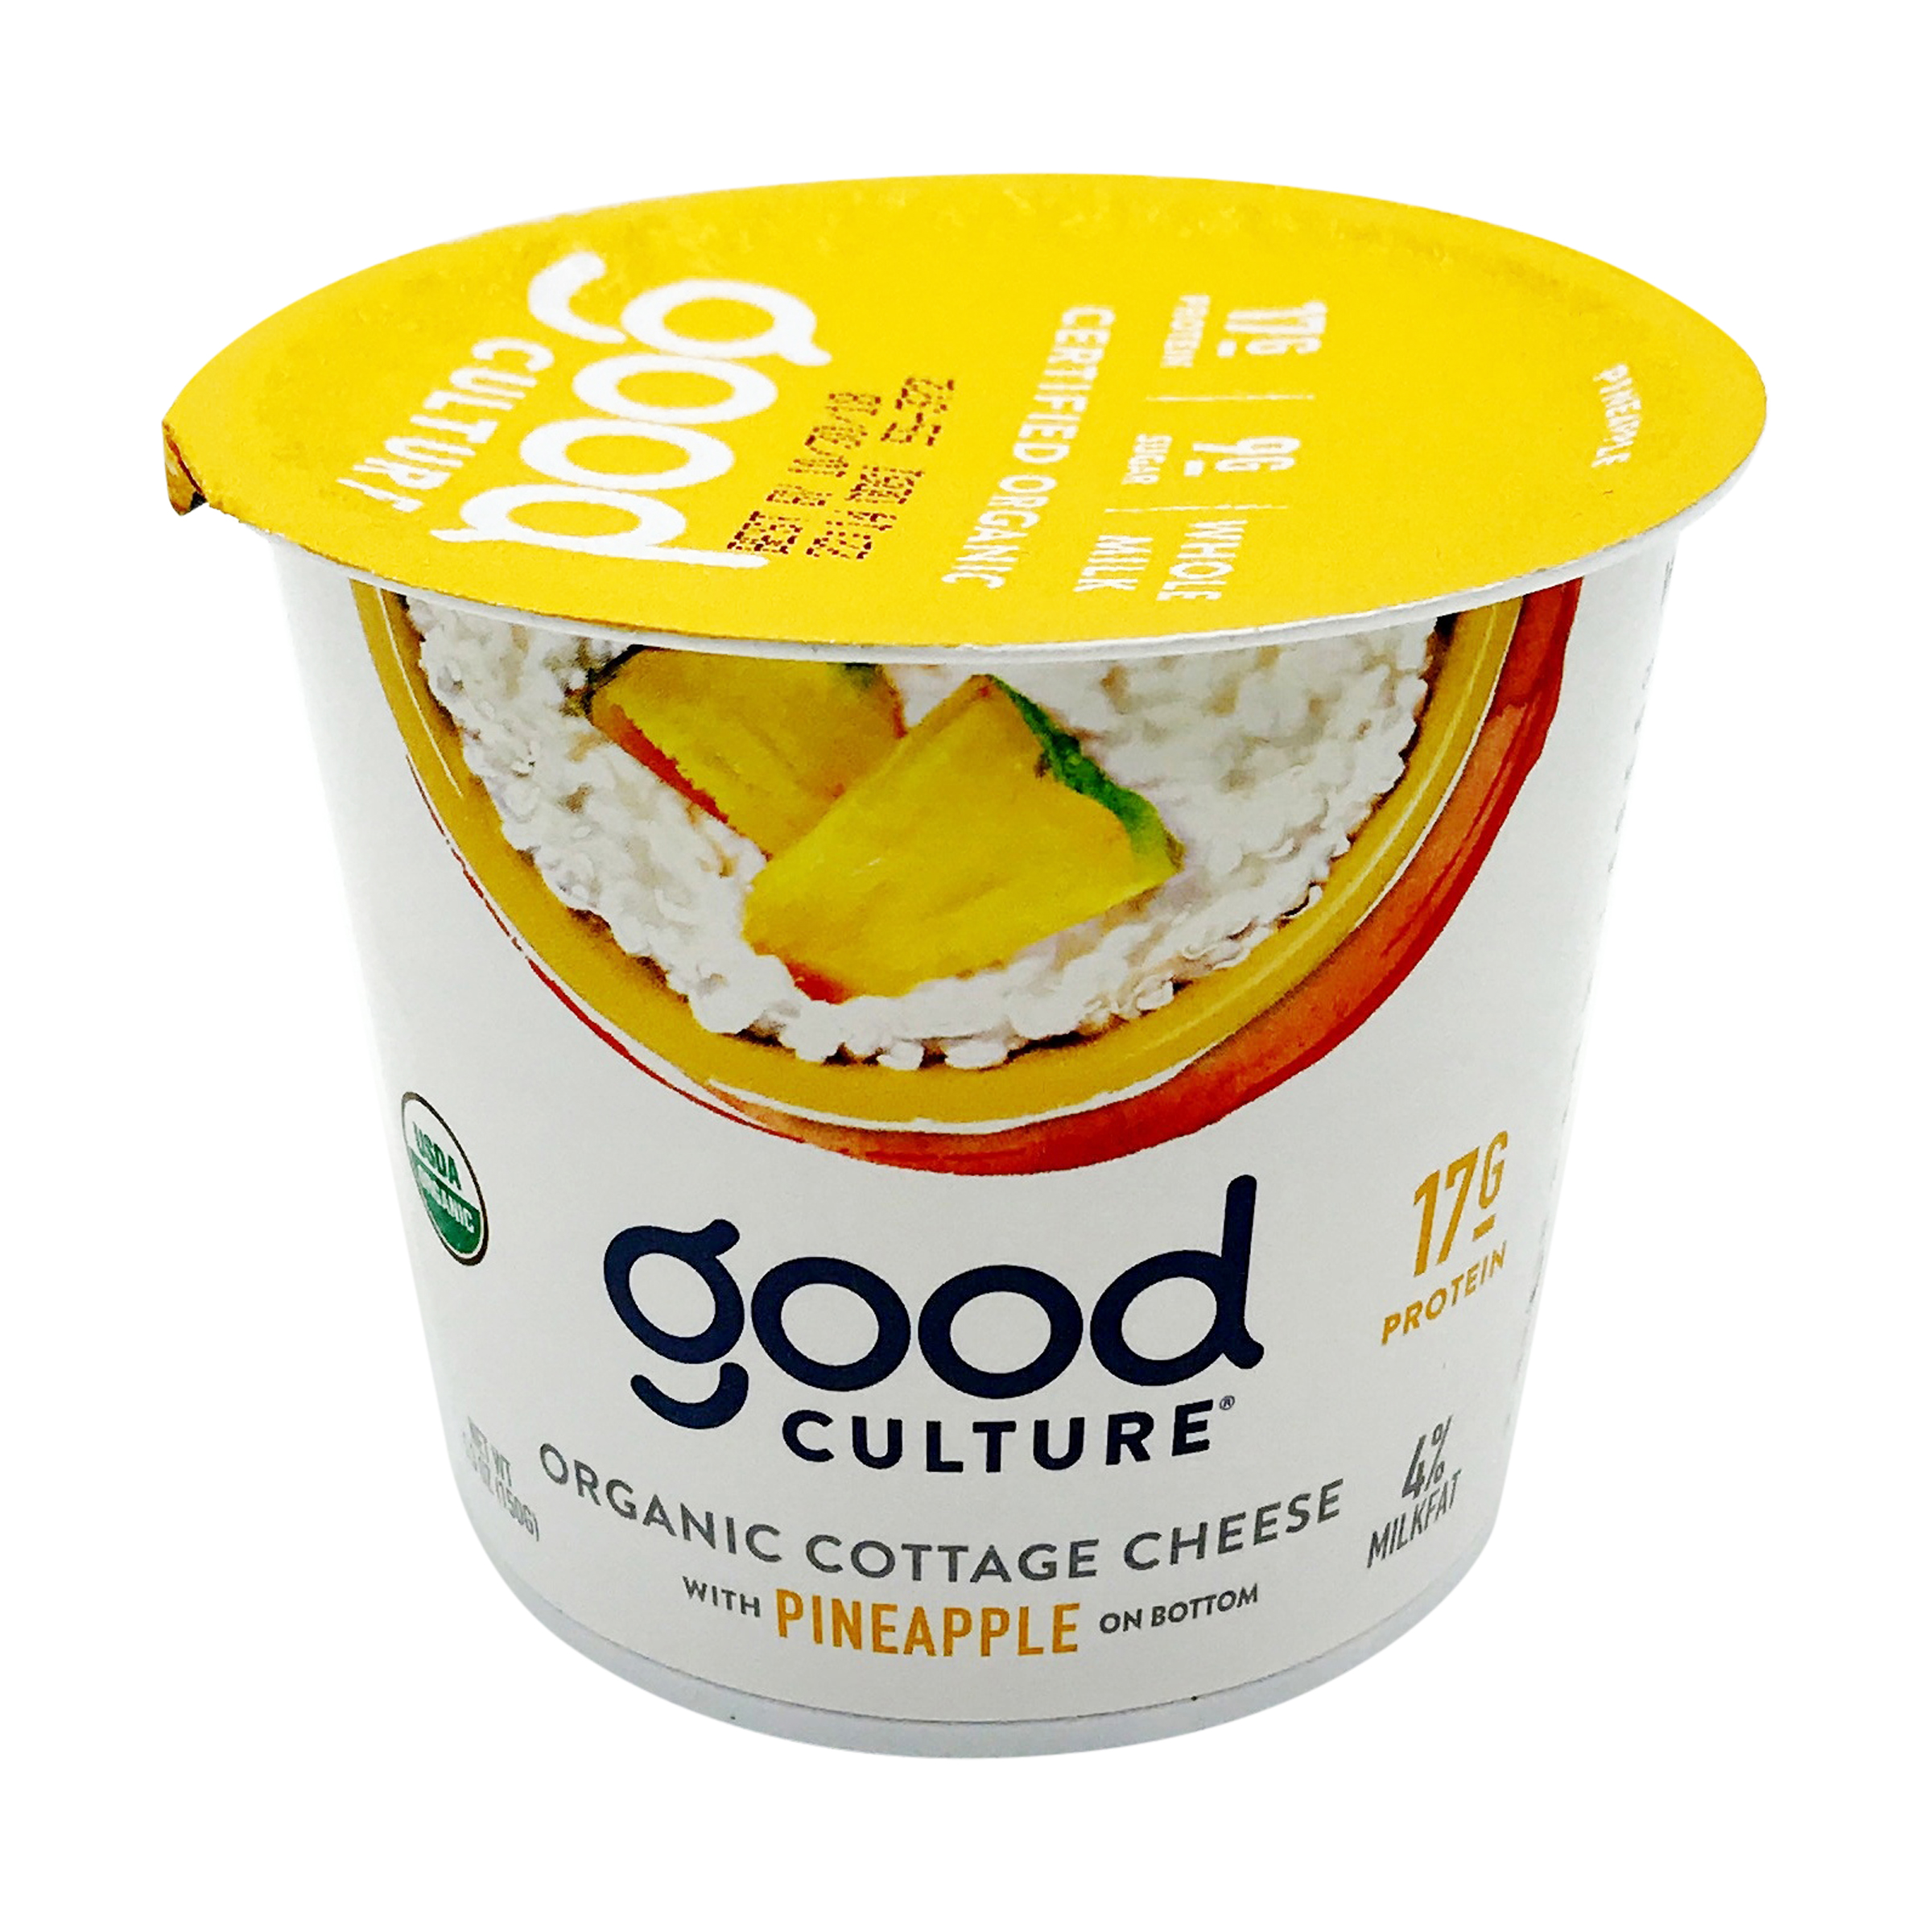 Organic Pineapple Cottage Cheese 5 3 Oz Good Culture Whole